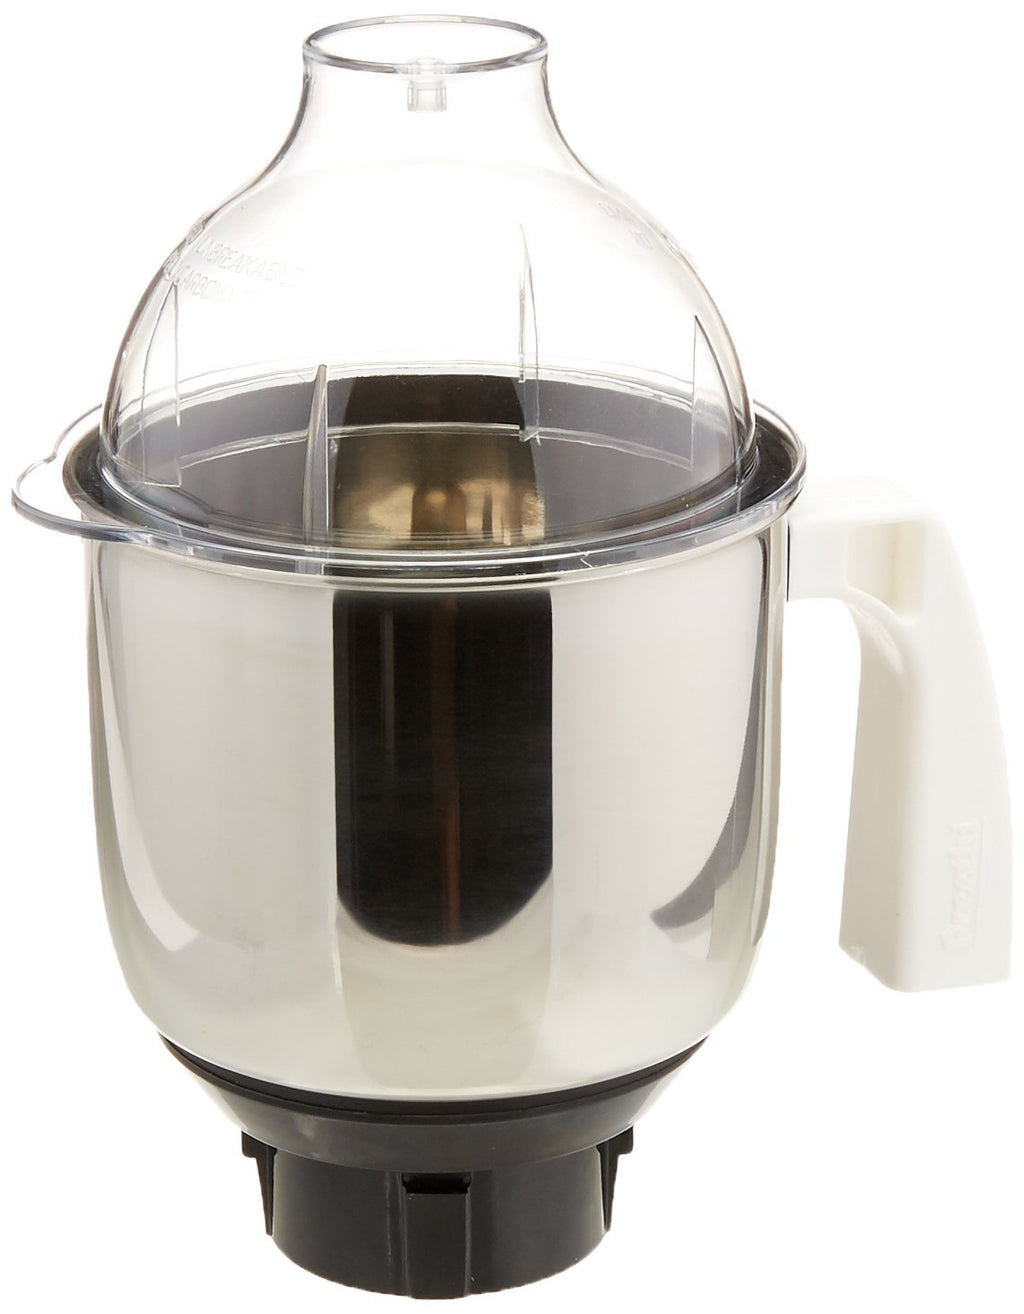 Preethi Eco Plus Mixer Grinder 110-Volt for Use in USA/Canada, White, 3-Jar